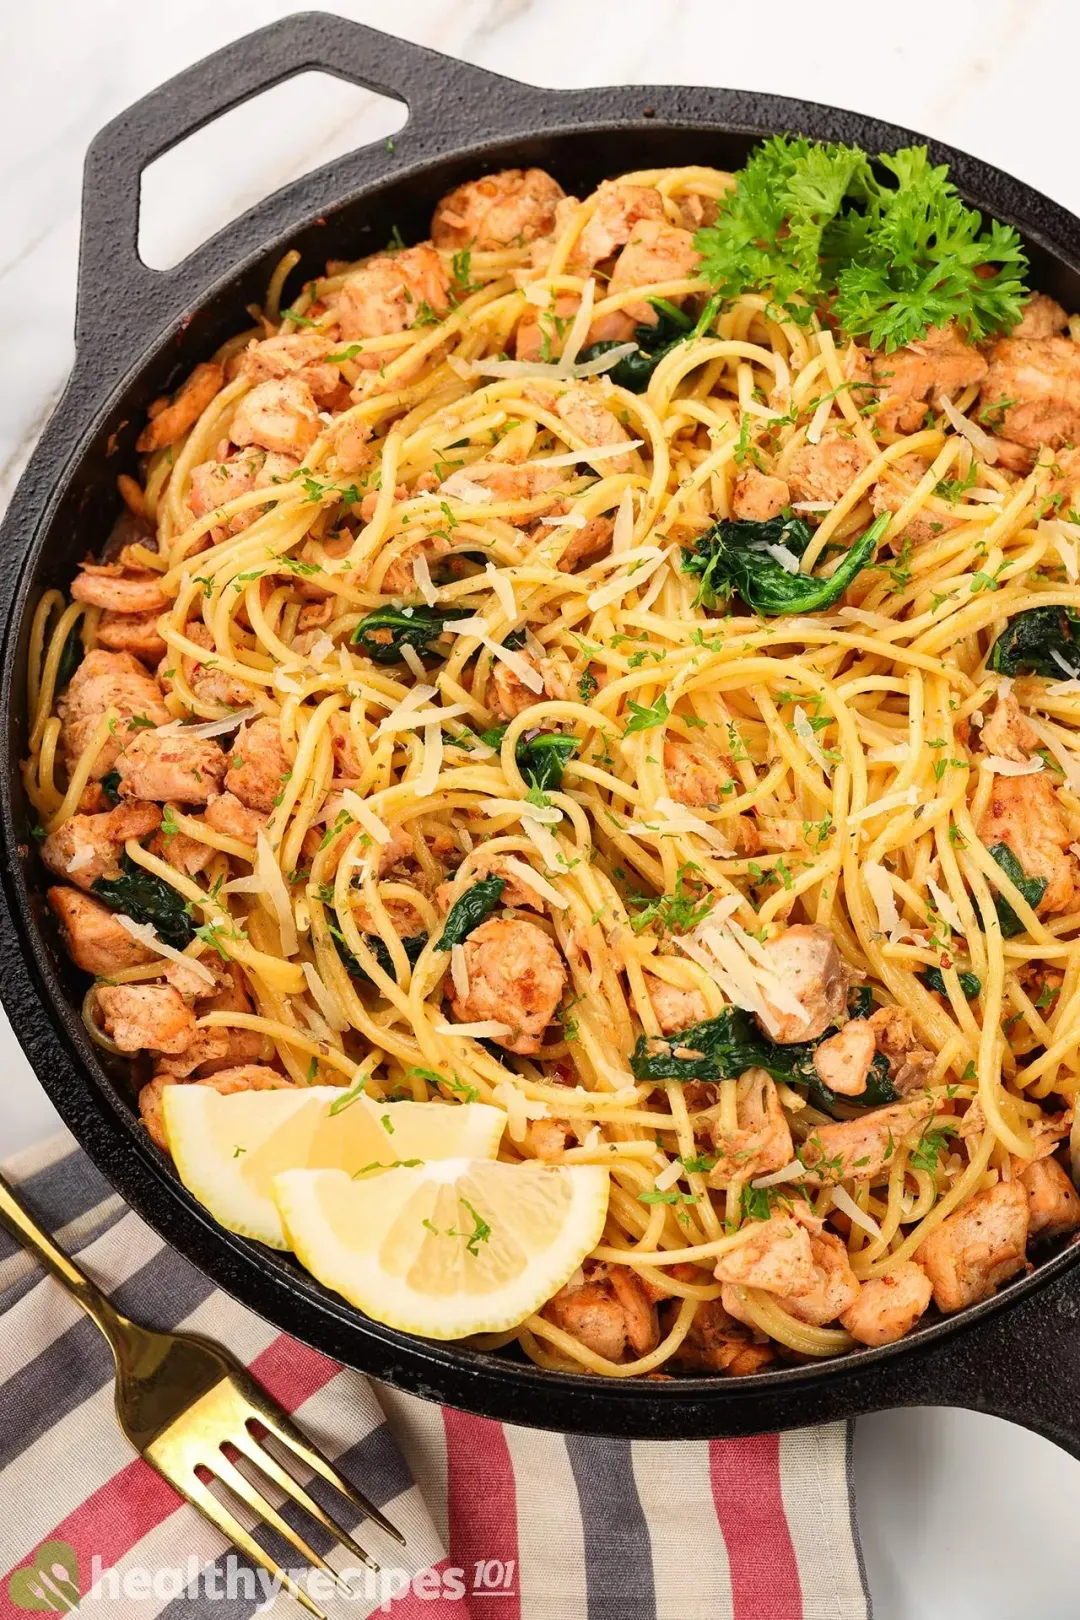 A cast iron skillet filled with cooked spaghetti, salmon, and spinach laid near a striped tablecloth, two lemon wedges, and fresh parsley